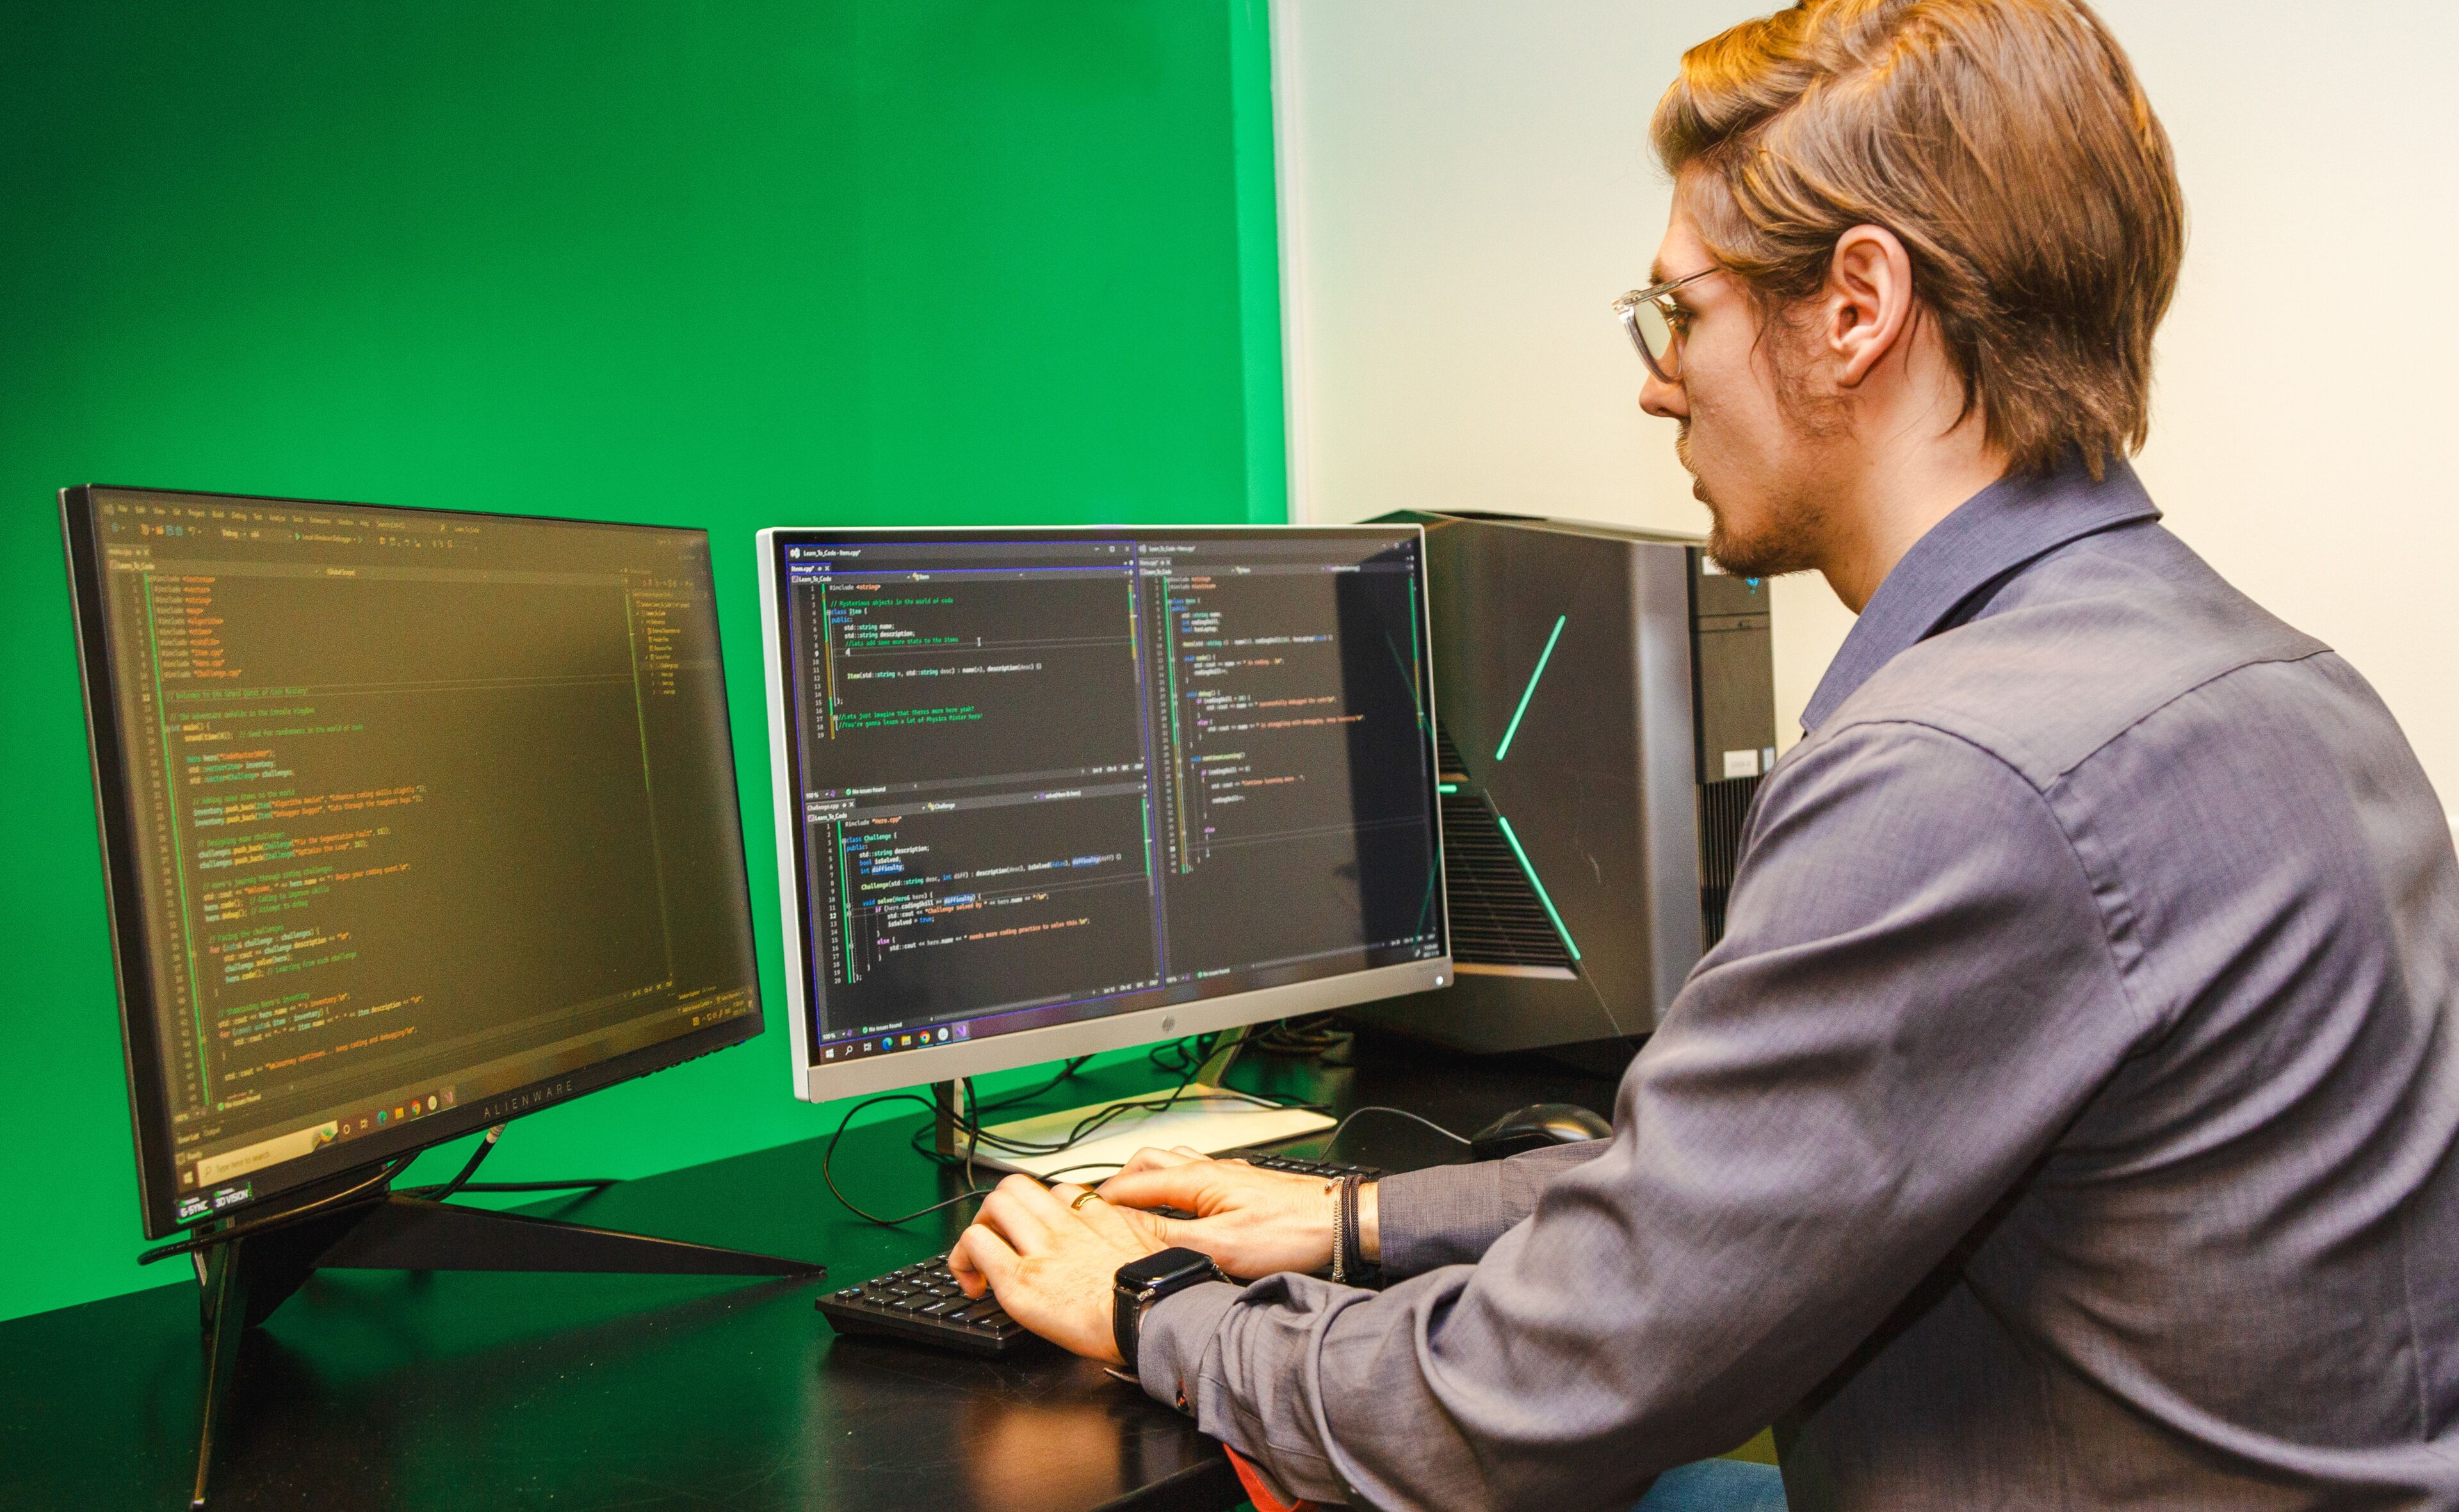 A focused male software developer works on code across dual monitors in an office with a green wall.